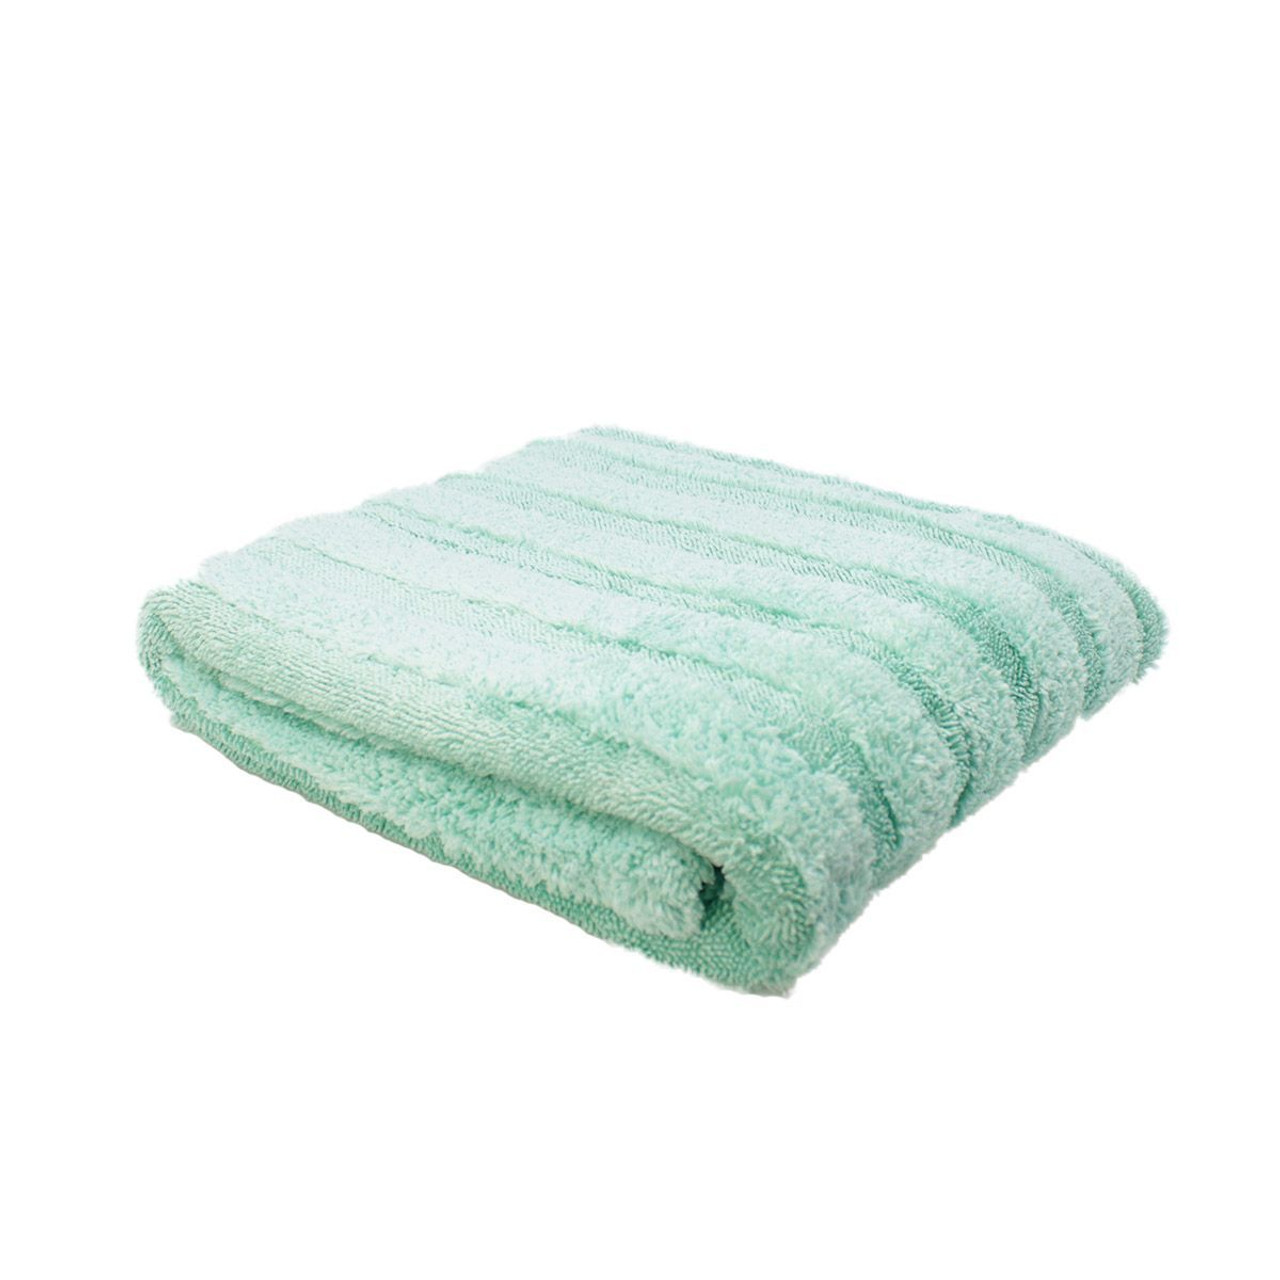 The Guzzler Waffle Weave Towel by Cobra 16 x 24